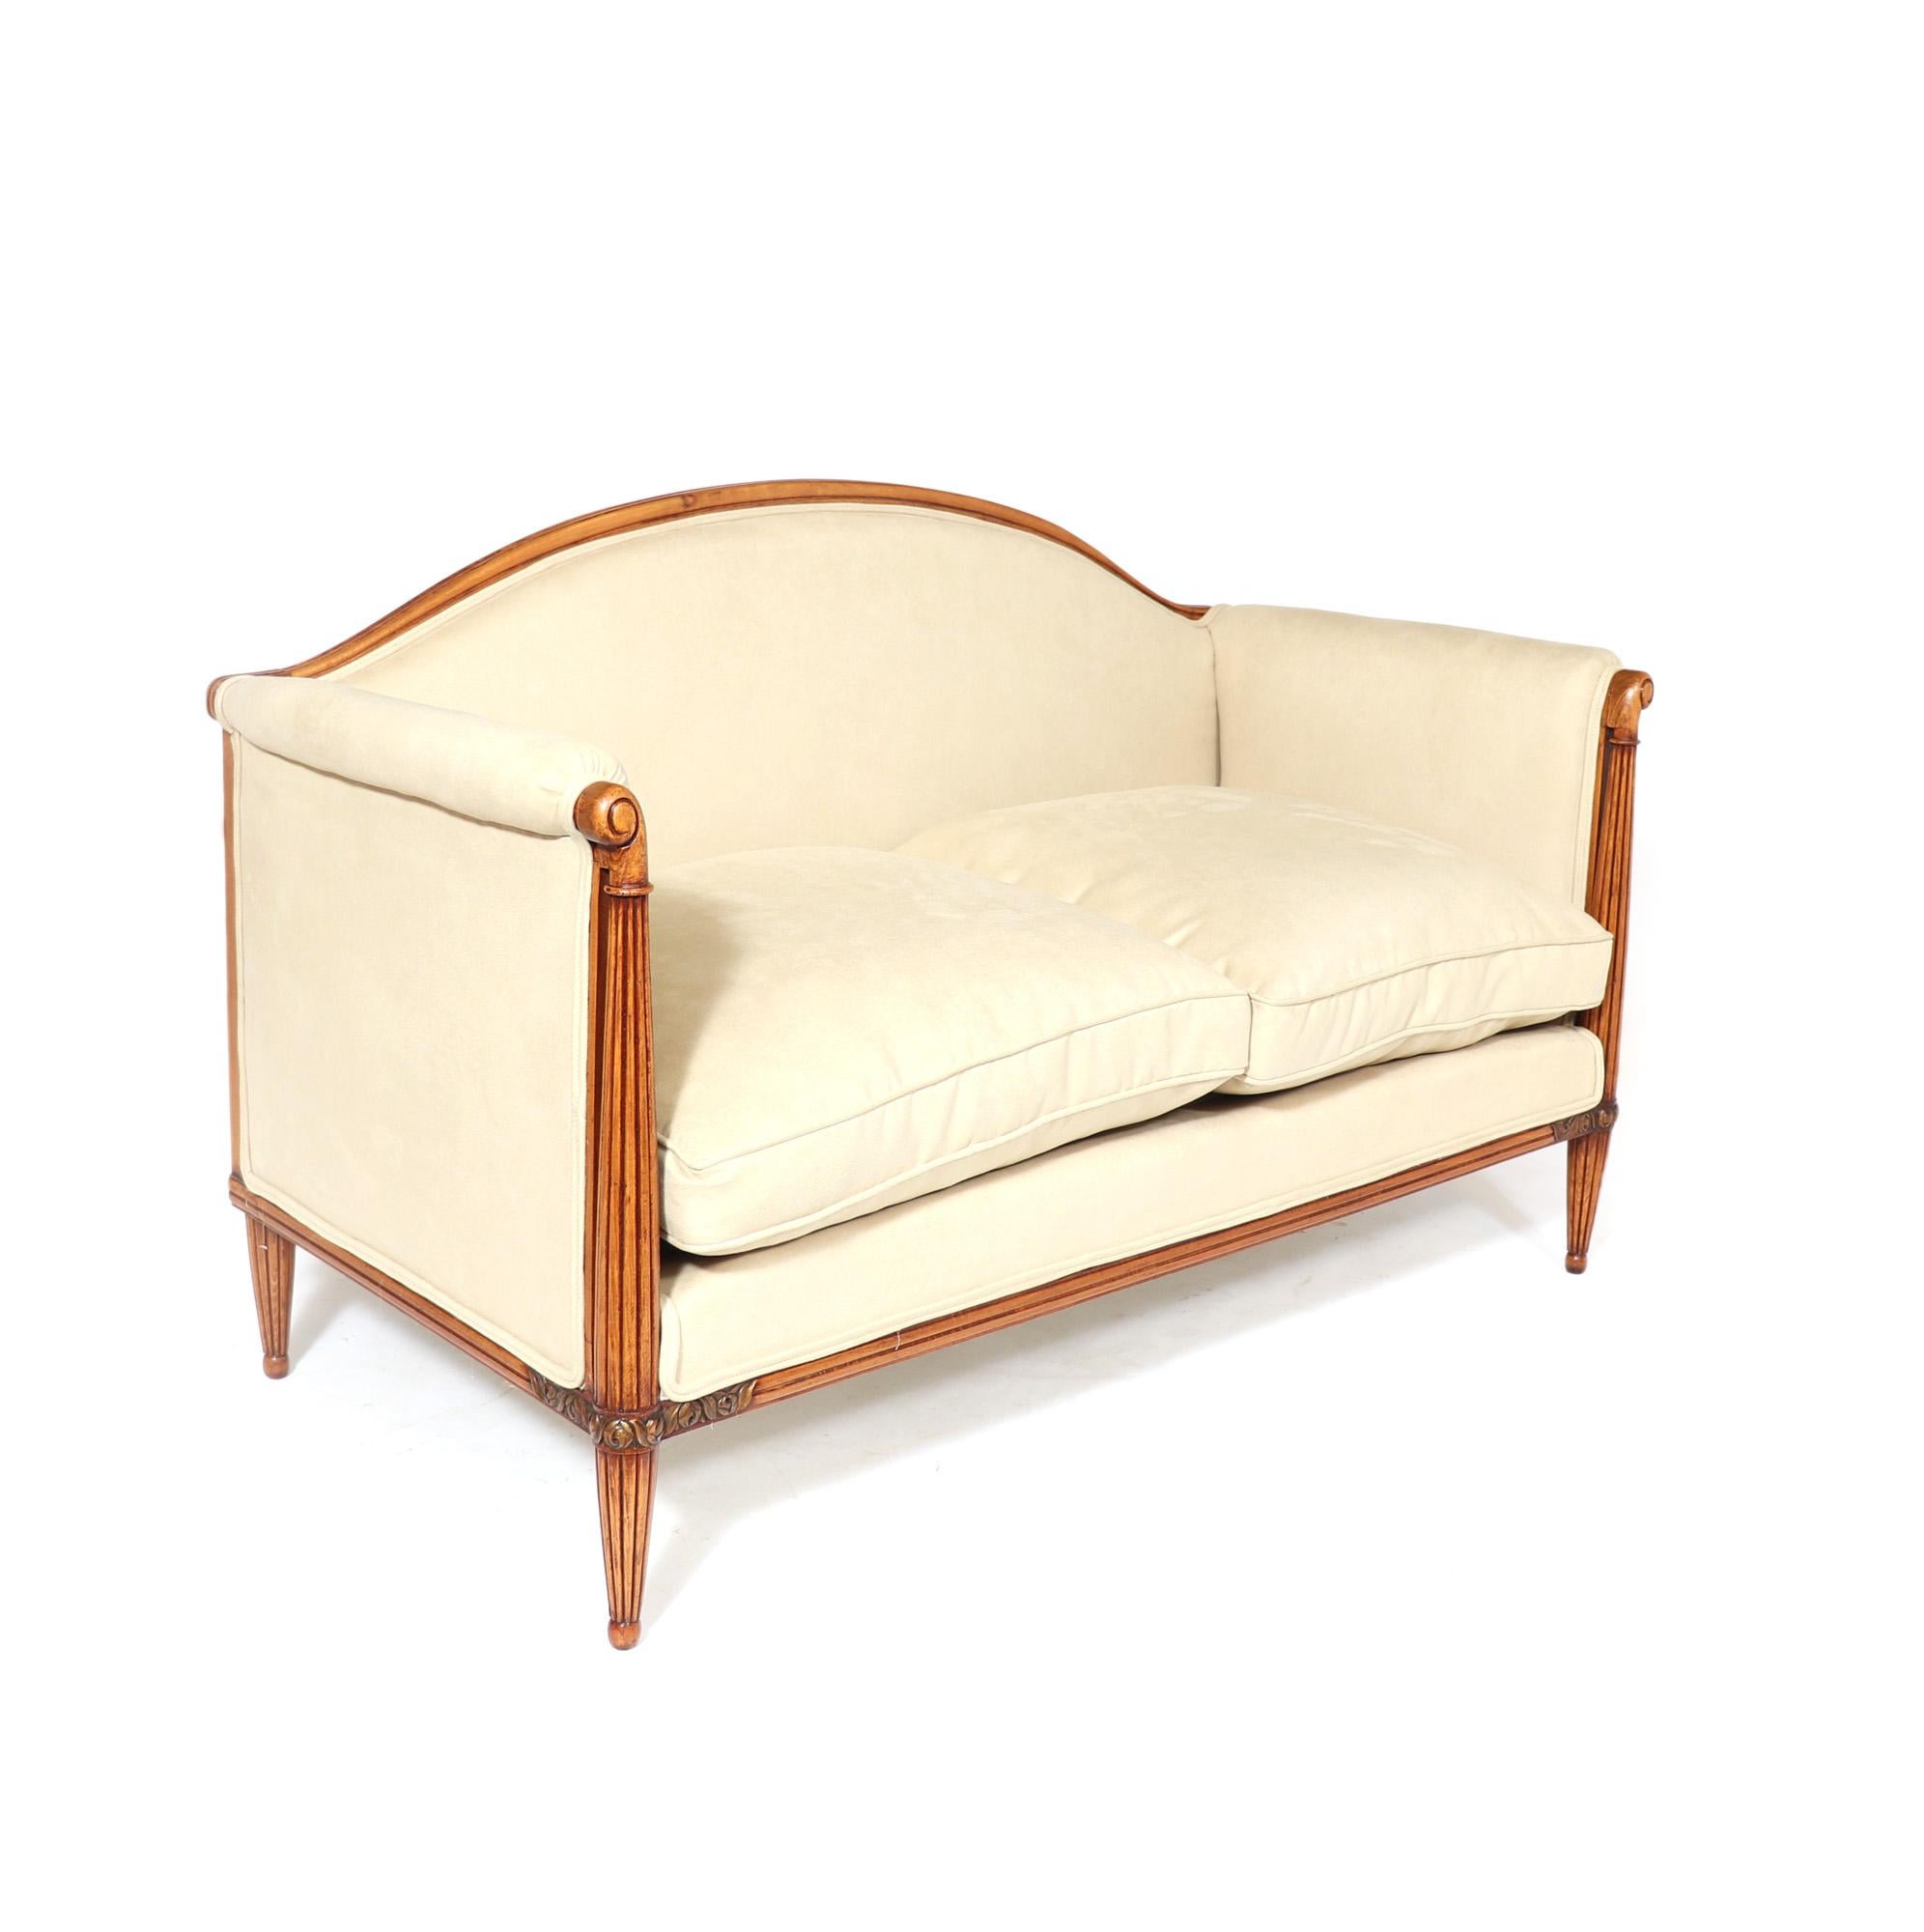 Early 20th Century French Art Deco Sofa in the Manner of Maurice Dufrene